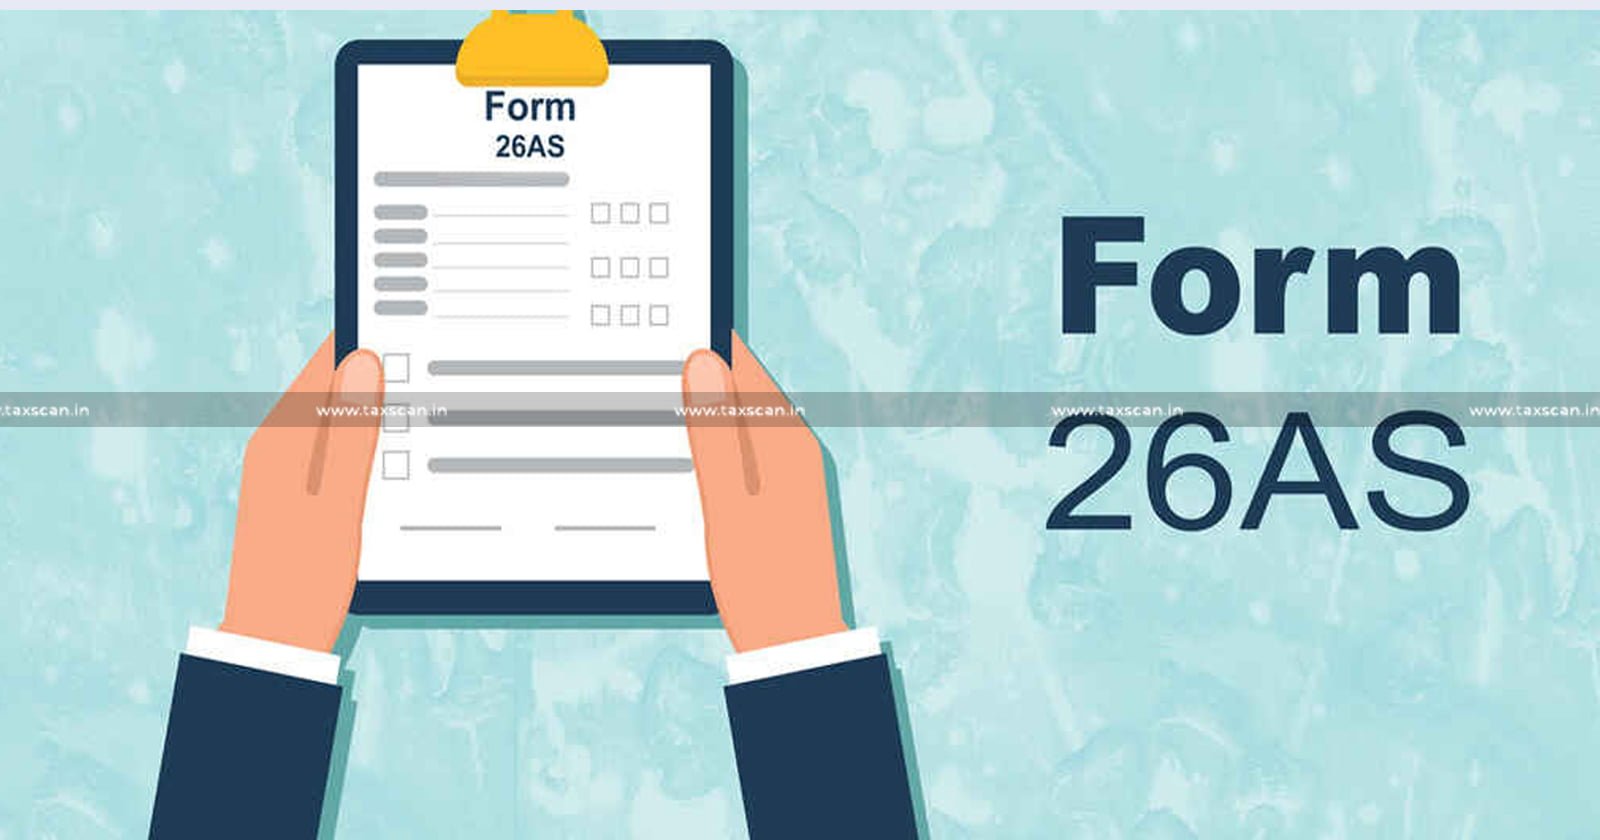 ITAT - ITAT Delhi - Income tax - Form 26AS - Duplicate entries in Form 26AS - TAXSCAN